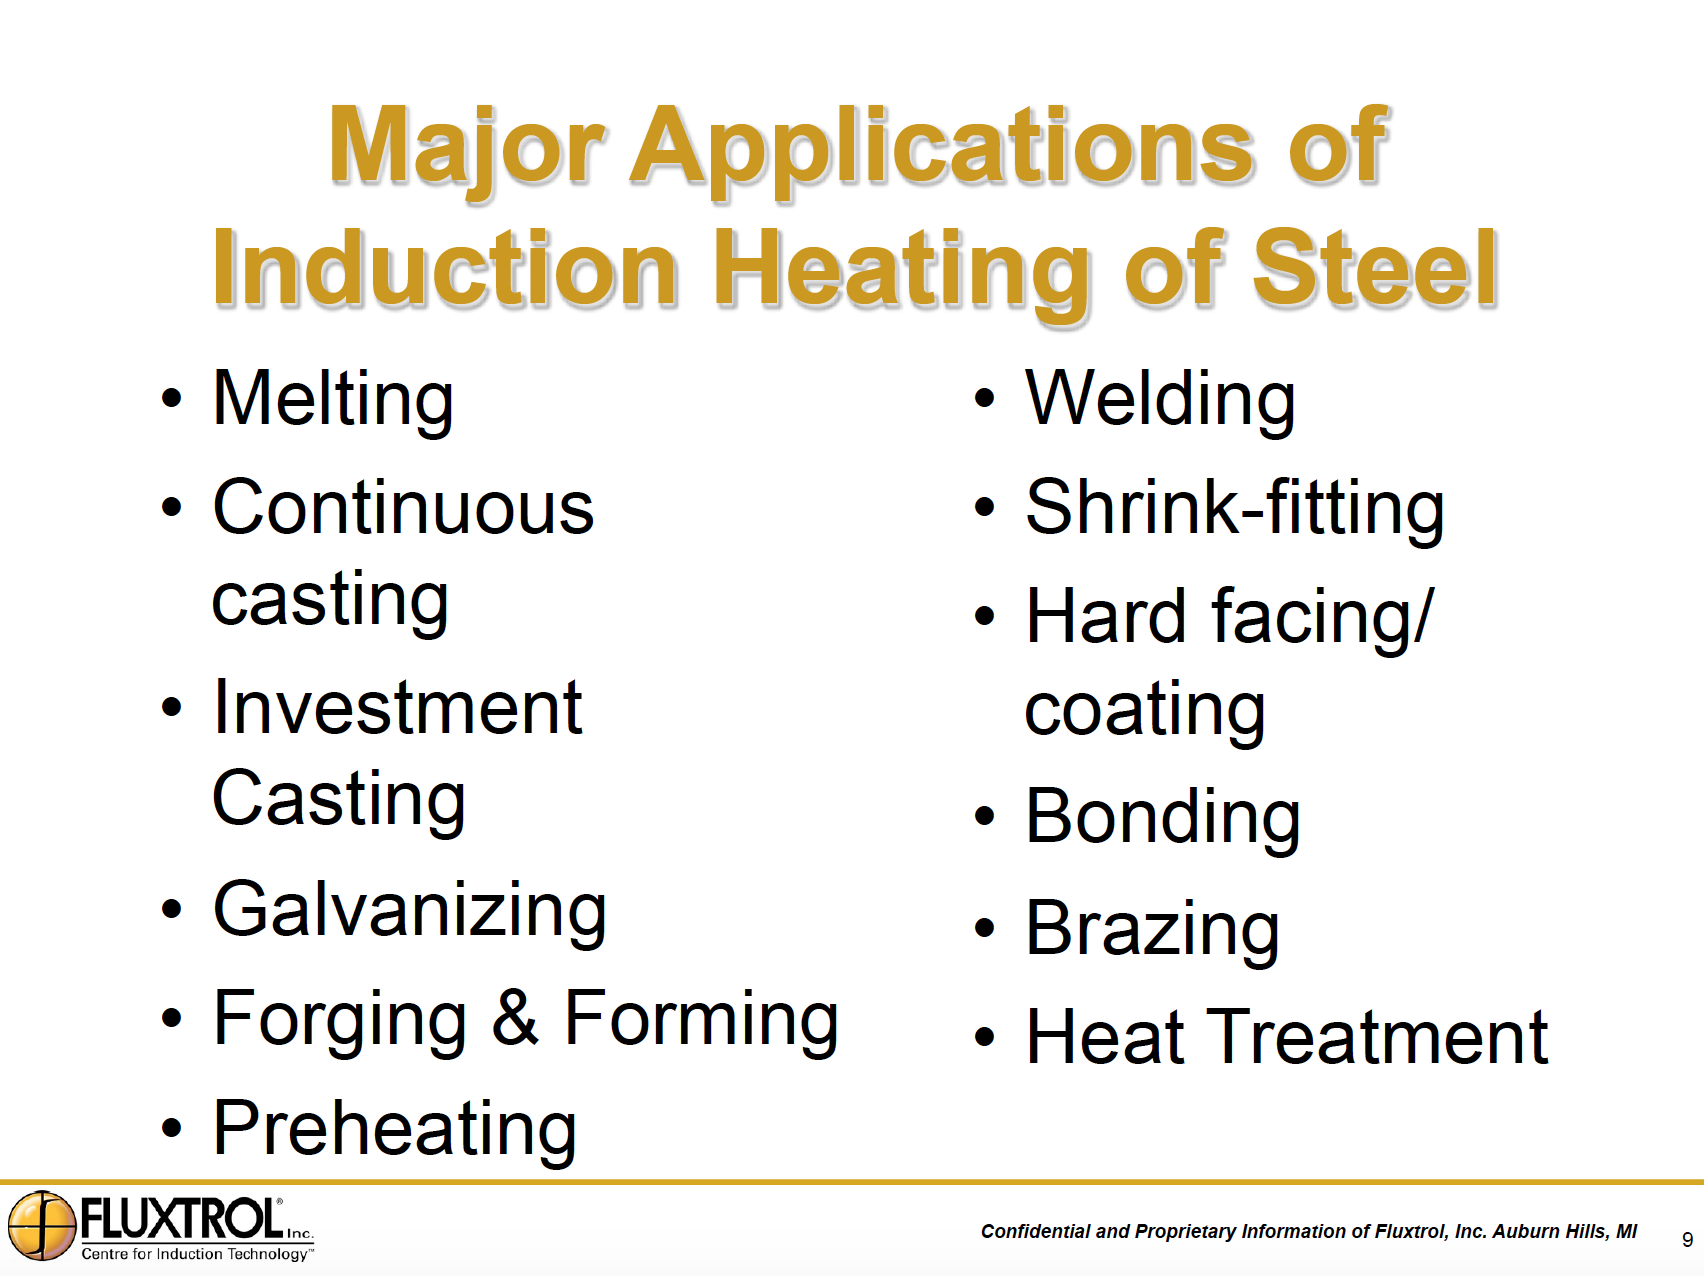 Fluxtrol | Applications of Induction Heating Enabling Advancement in Materials Science Figure 8 - Major Applications of Induction Heating of Steel